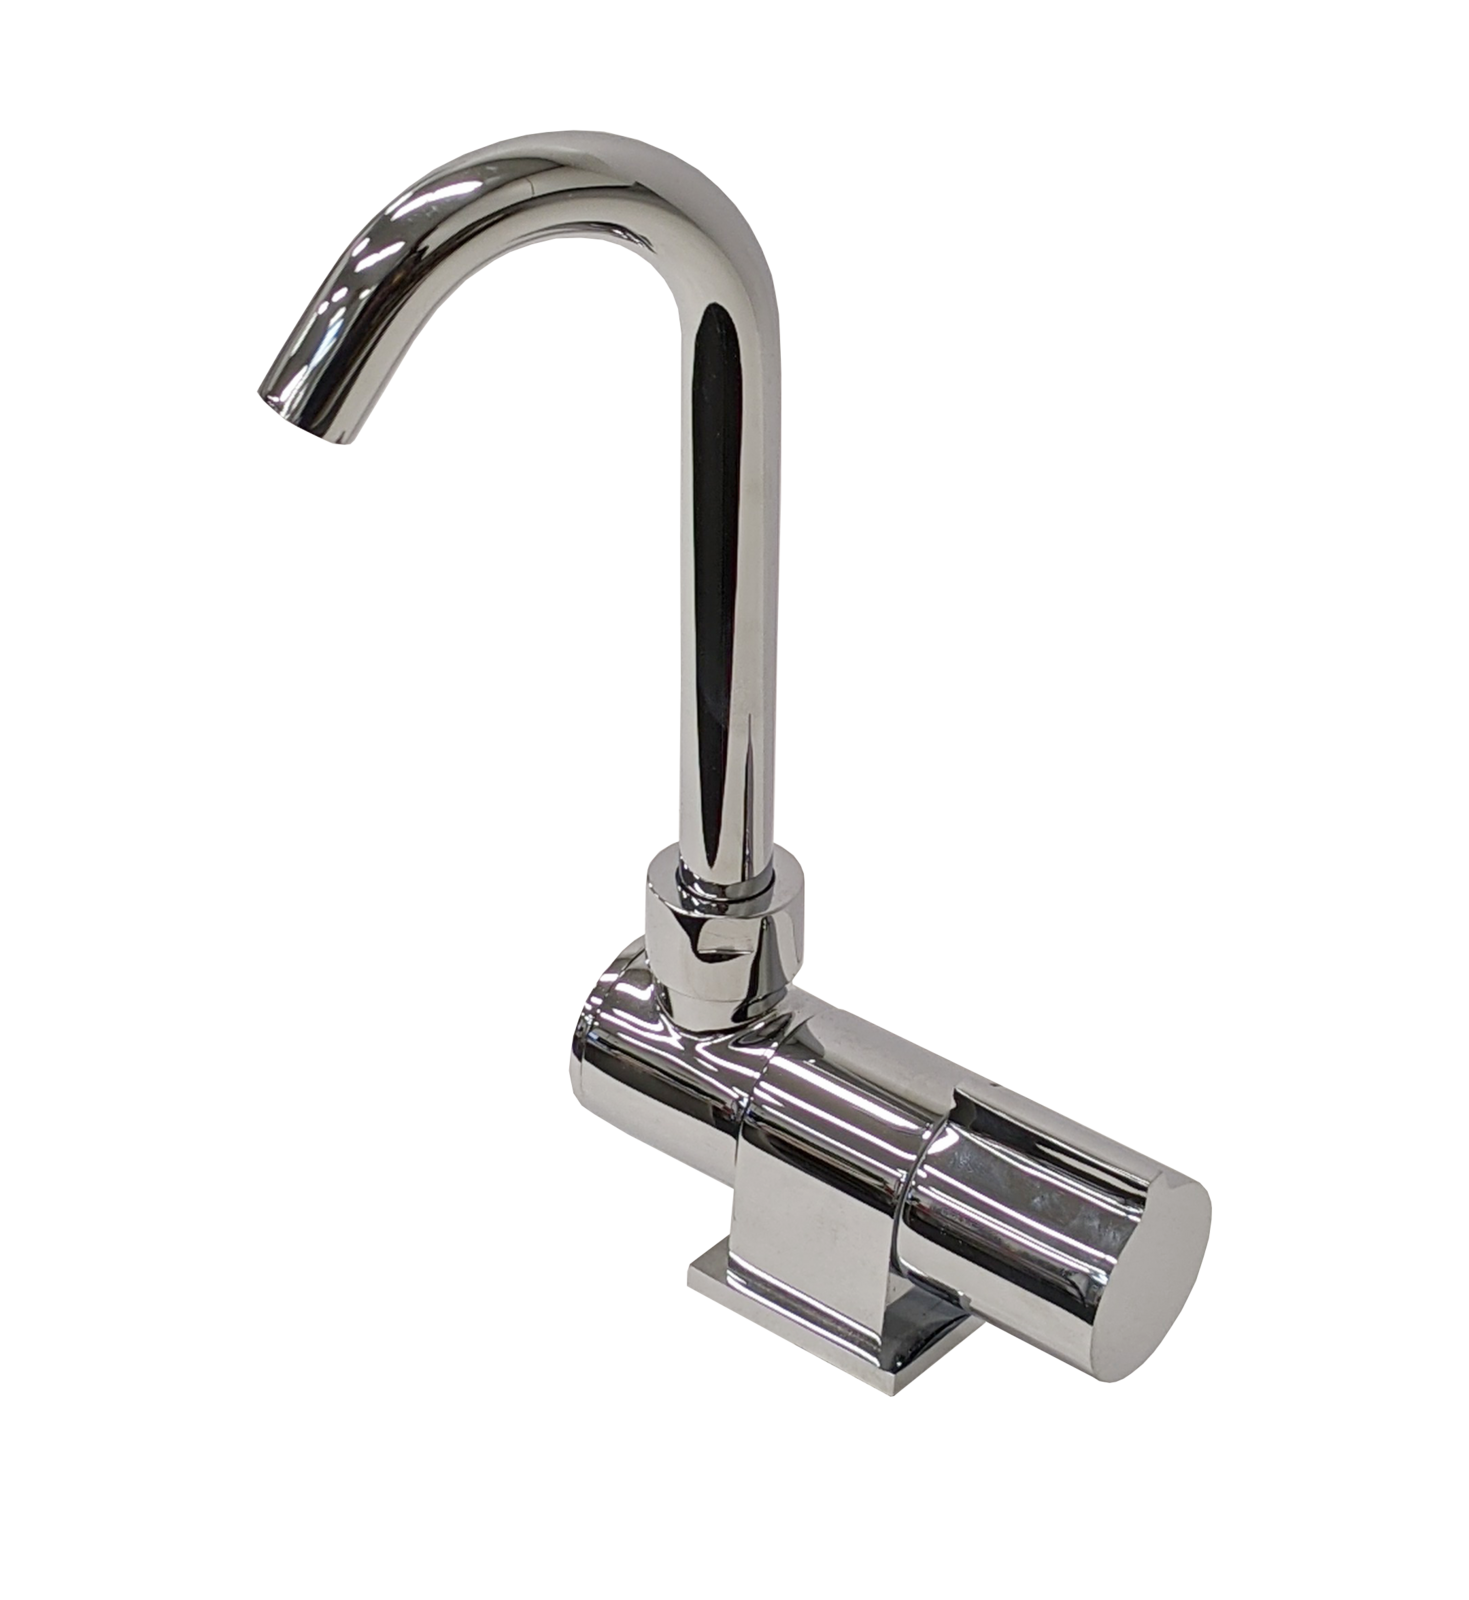 hidden-Fold Down Faucet [Type: Cold Water]